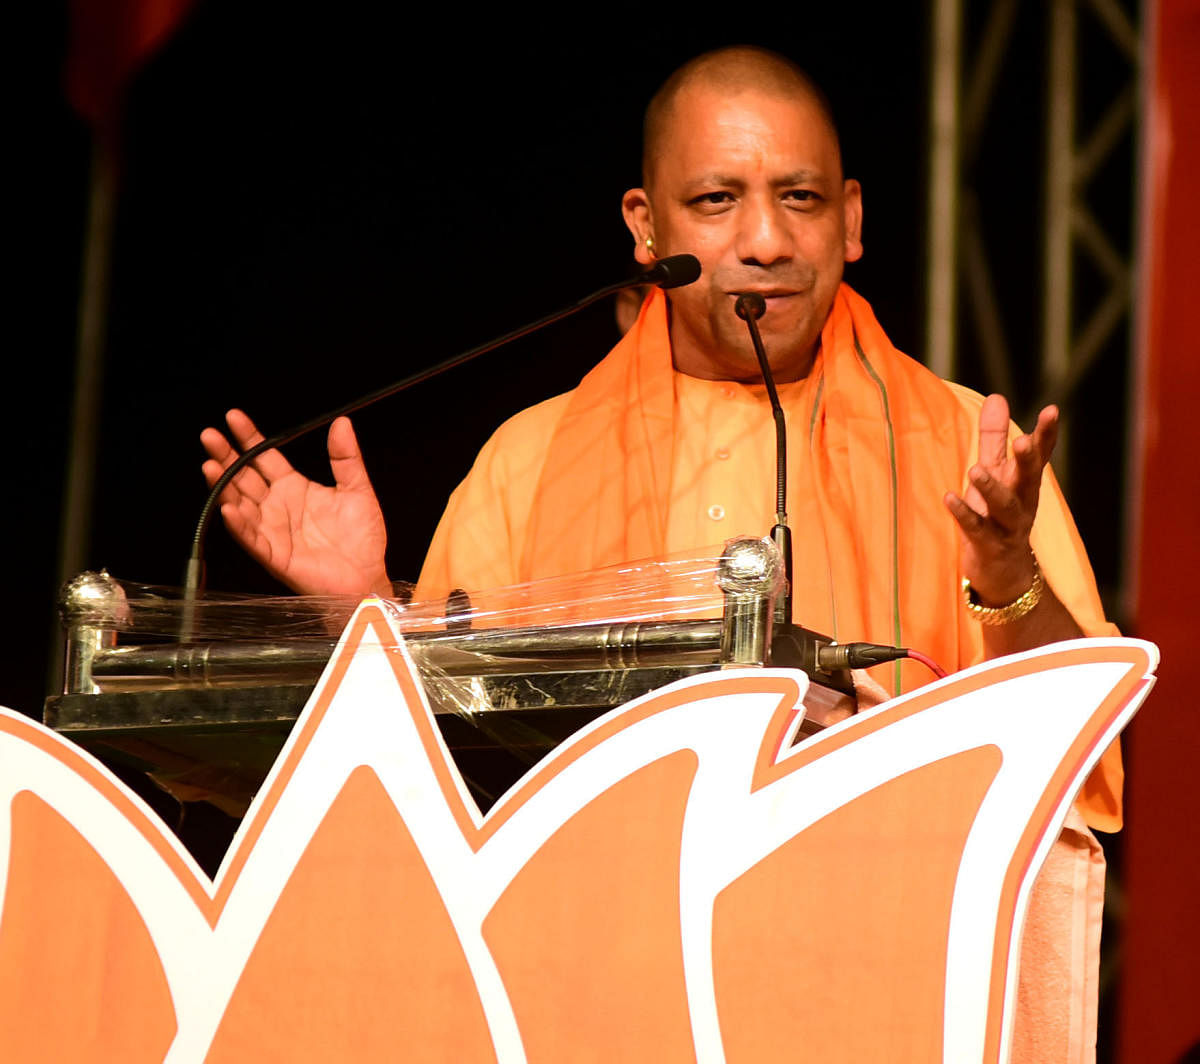 Adityanath is scheduled to address election rallies in Karnataka on Thursday and Friday.